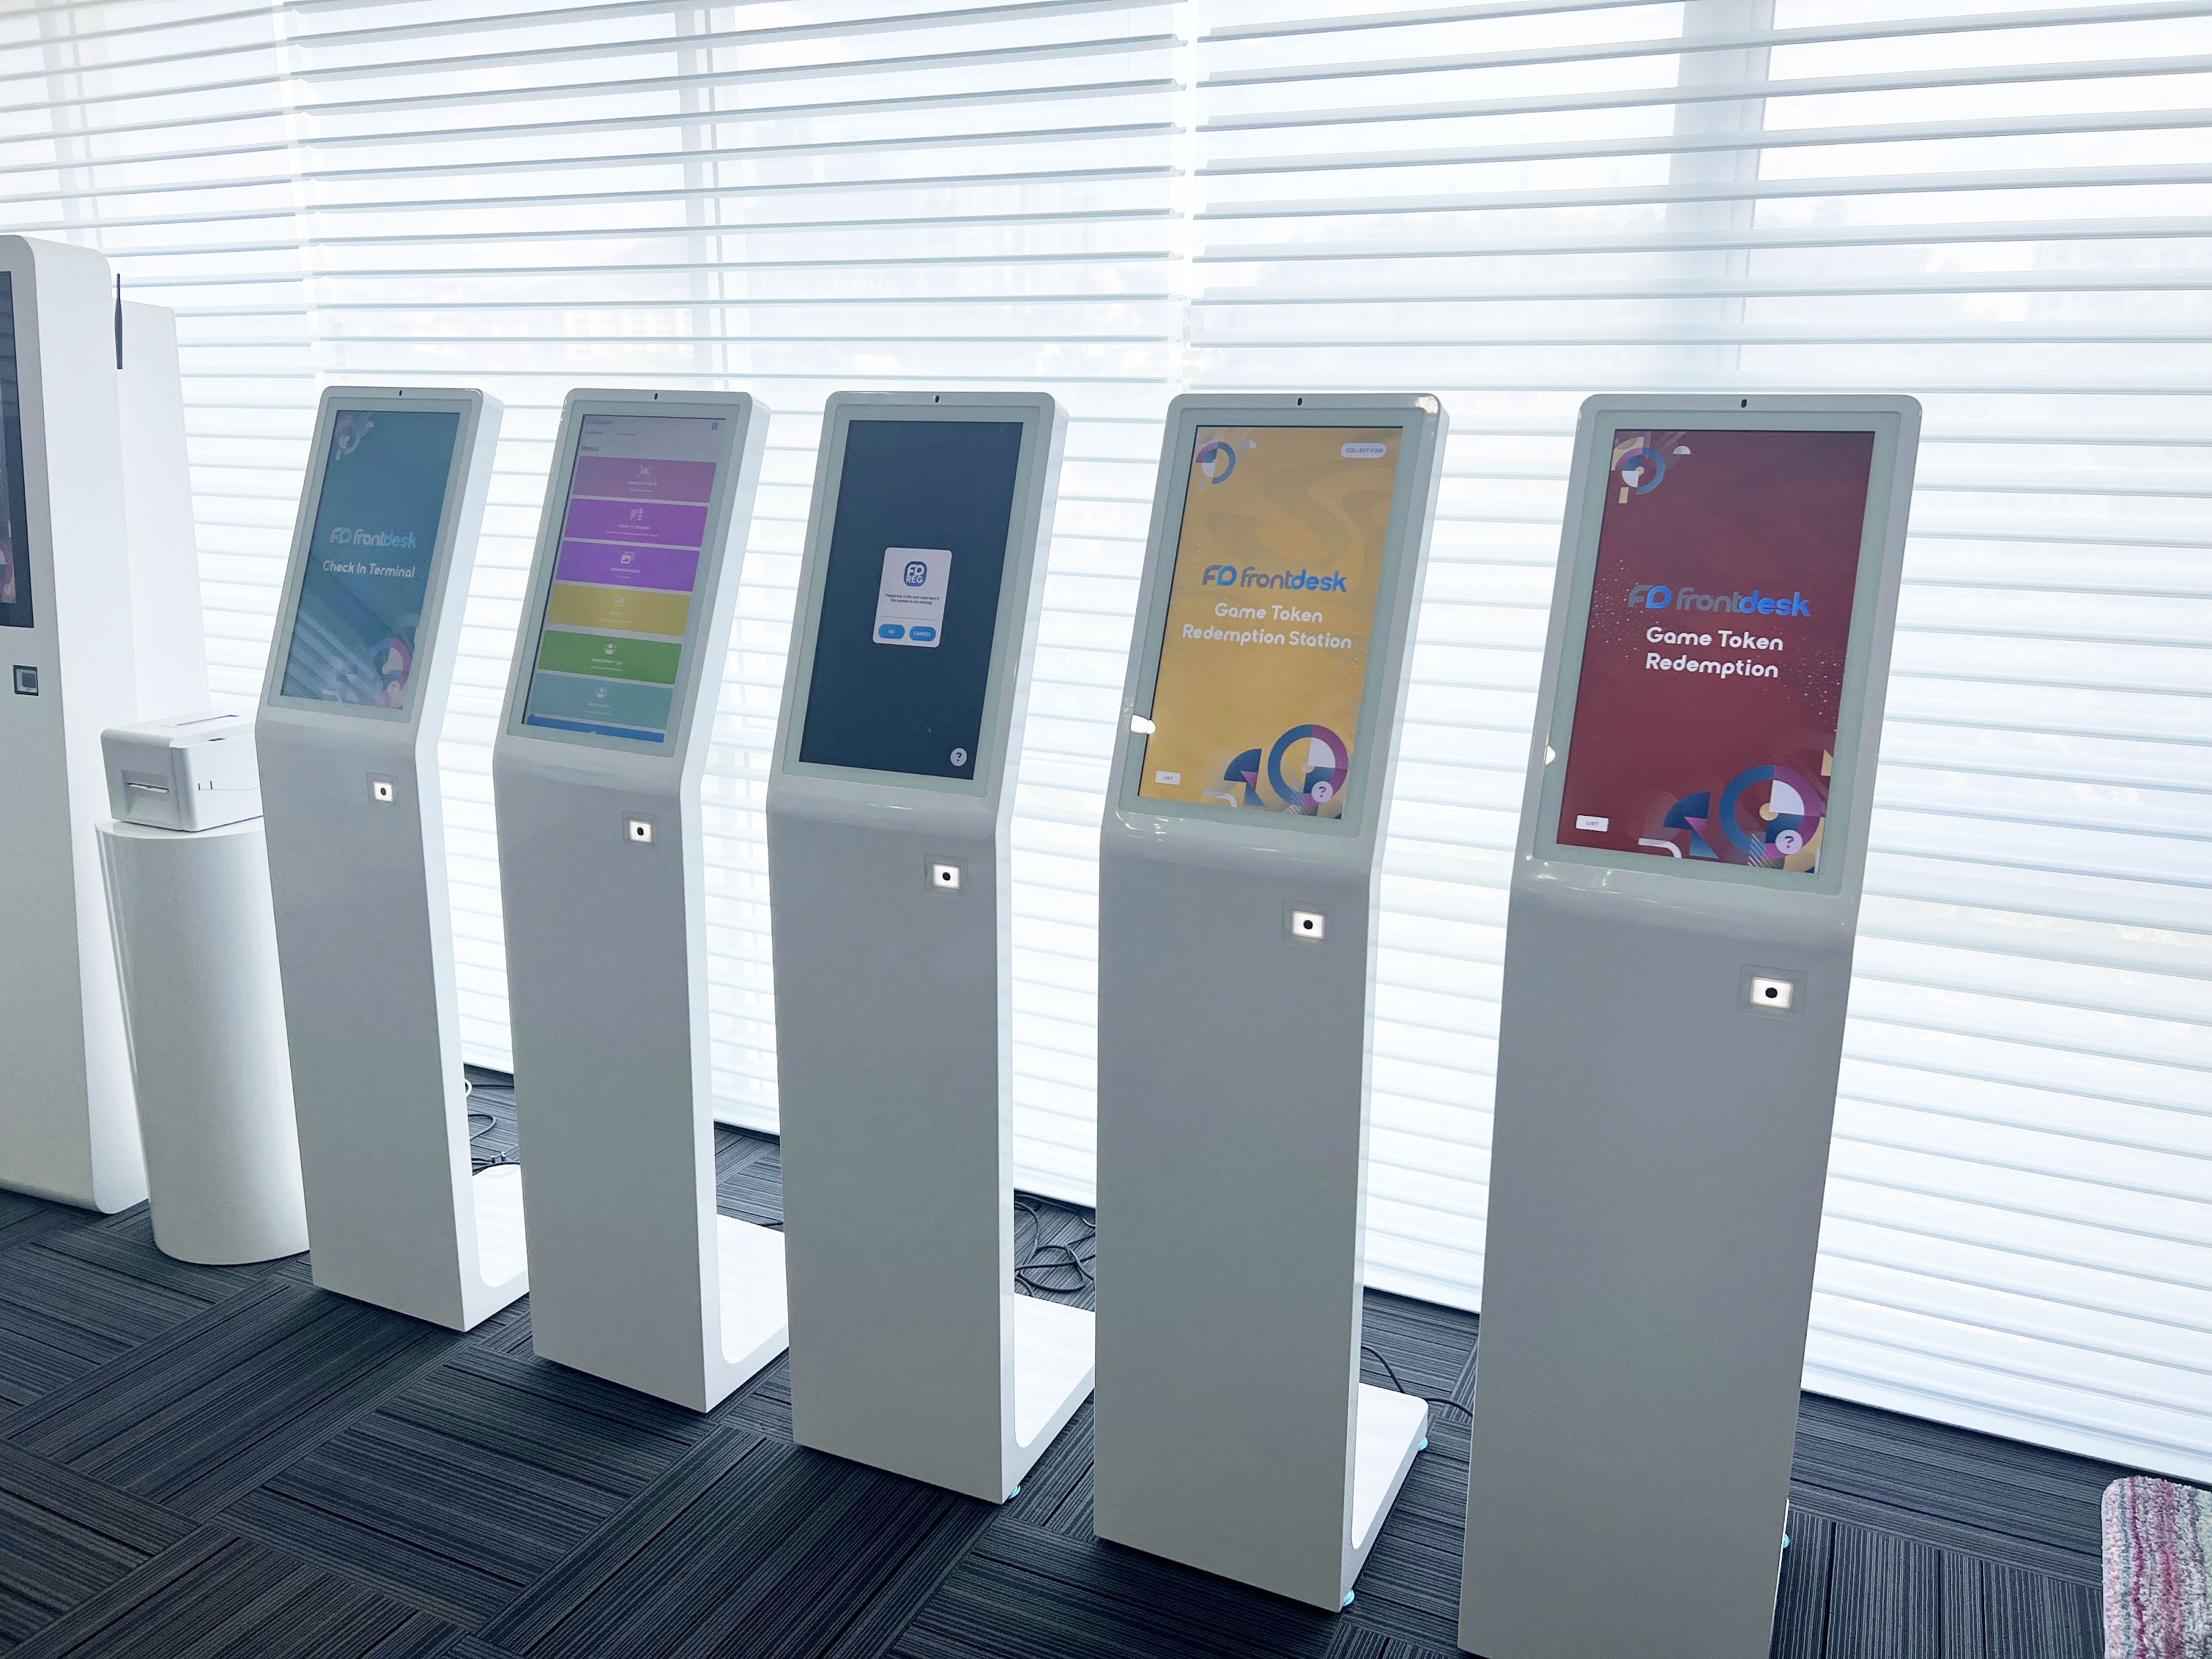 The image showcases our interactive kiosk equipped with a web application, built-in camera, and QR scanner. This cutting-edge kiosk enables seamless interaction between users and the digital environment.